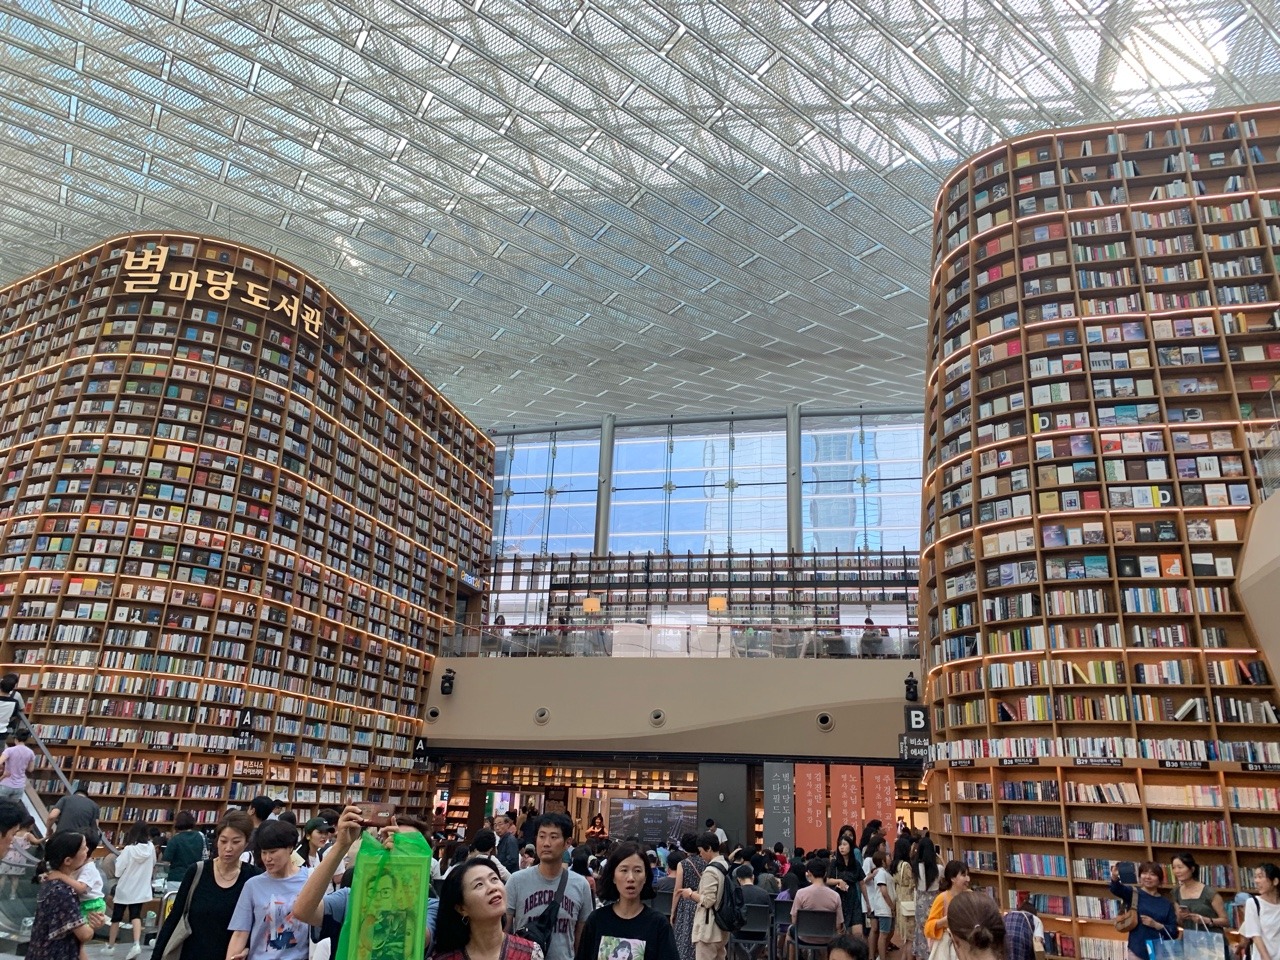 The library at Starfield COEX mall in Seoul really is something else. I move out of Seoul and into the South Korean countryside next week and ima miss being close to places like this. 